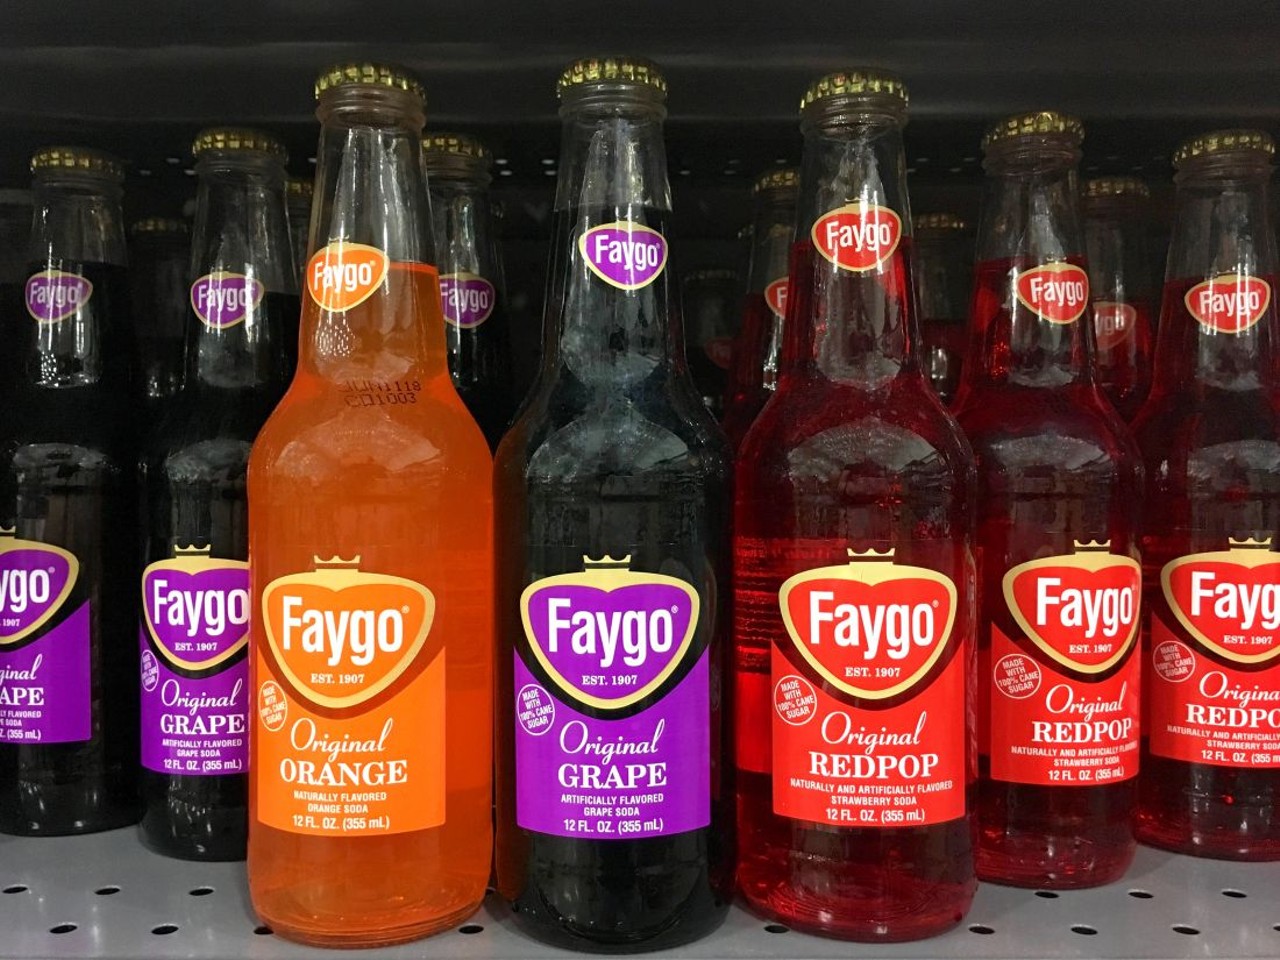 Detroit brand loyalty
Who but a Detroiter stocks their cupboards with nothing but Better Made chips, McClures pickles, Vernors, Faygo, and Strohs? If it&#146;s from Detroit, we love it.
Photo via Sheila Fitzgerald / Shutterstock.com